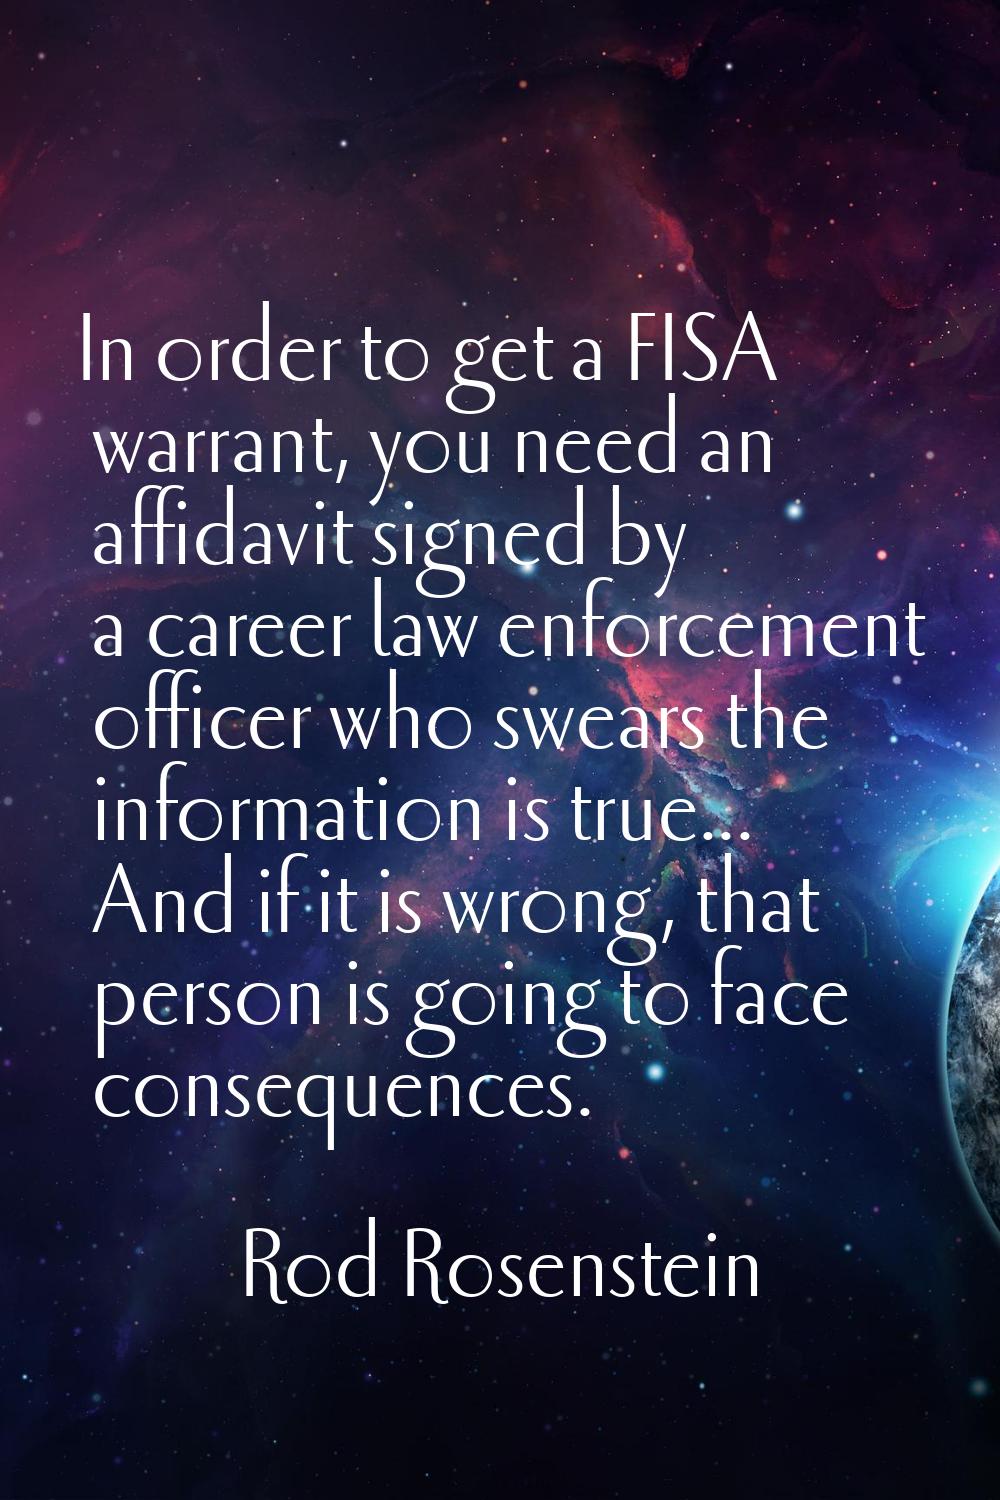 In order to get a FISA warrant, you need an affidavit signed by a career law enforcement officer wh